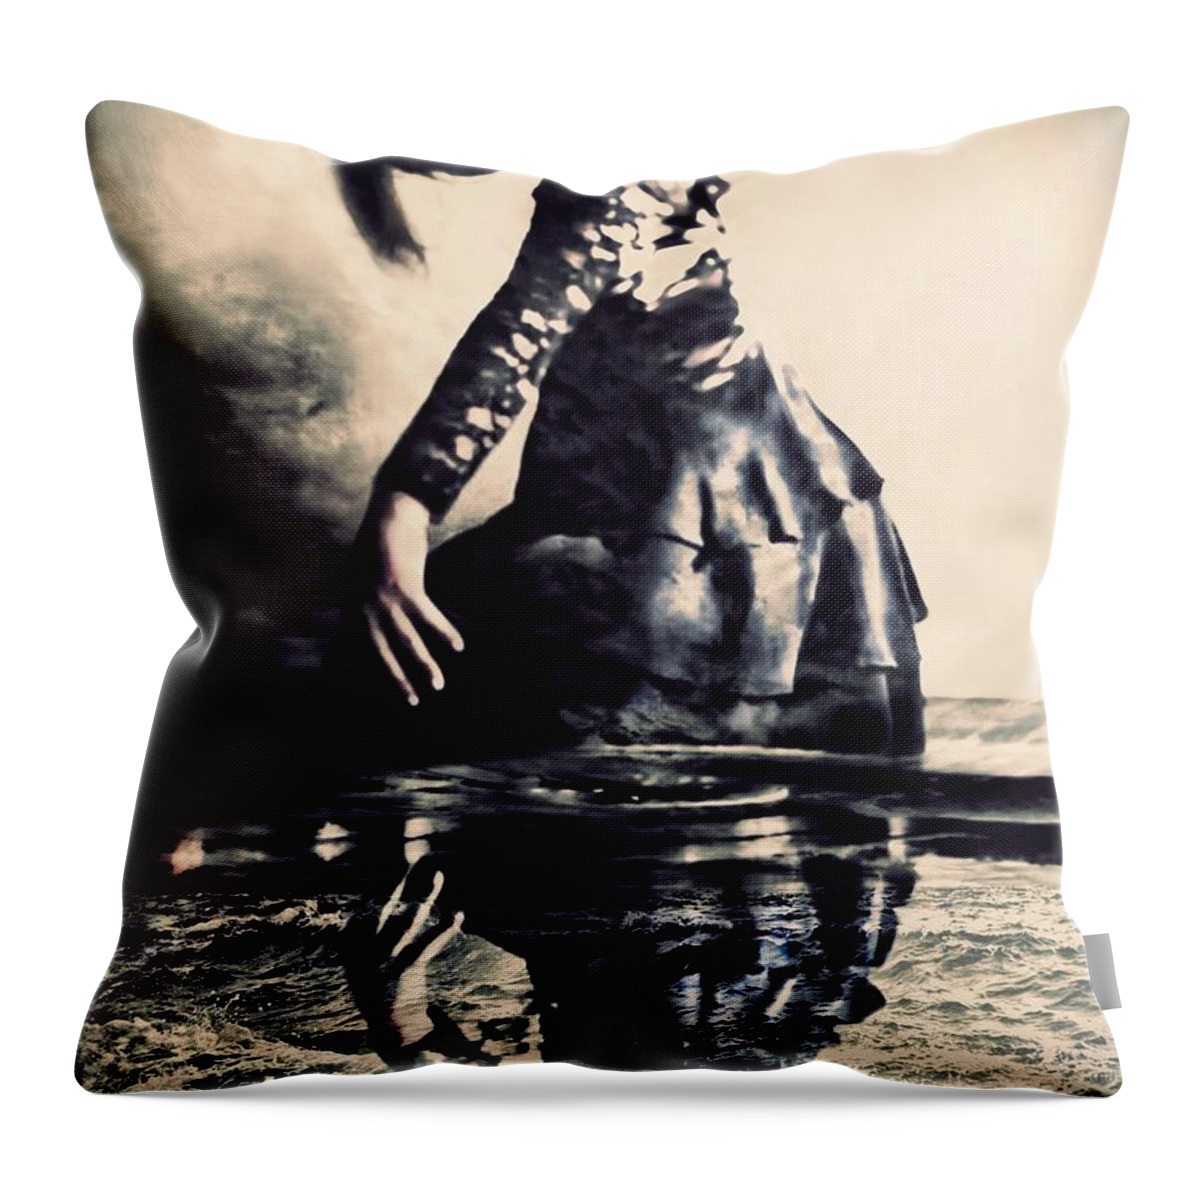  Throw Pillow featuring the photograph Cerebration by Jessica S